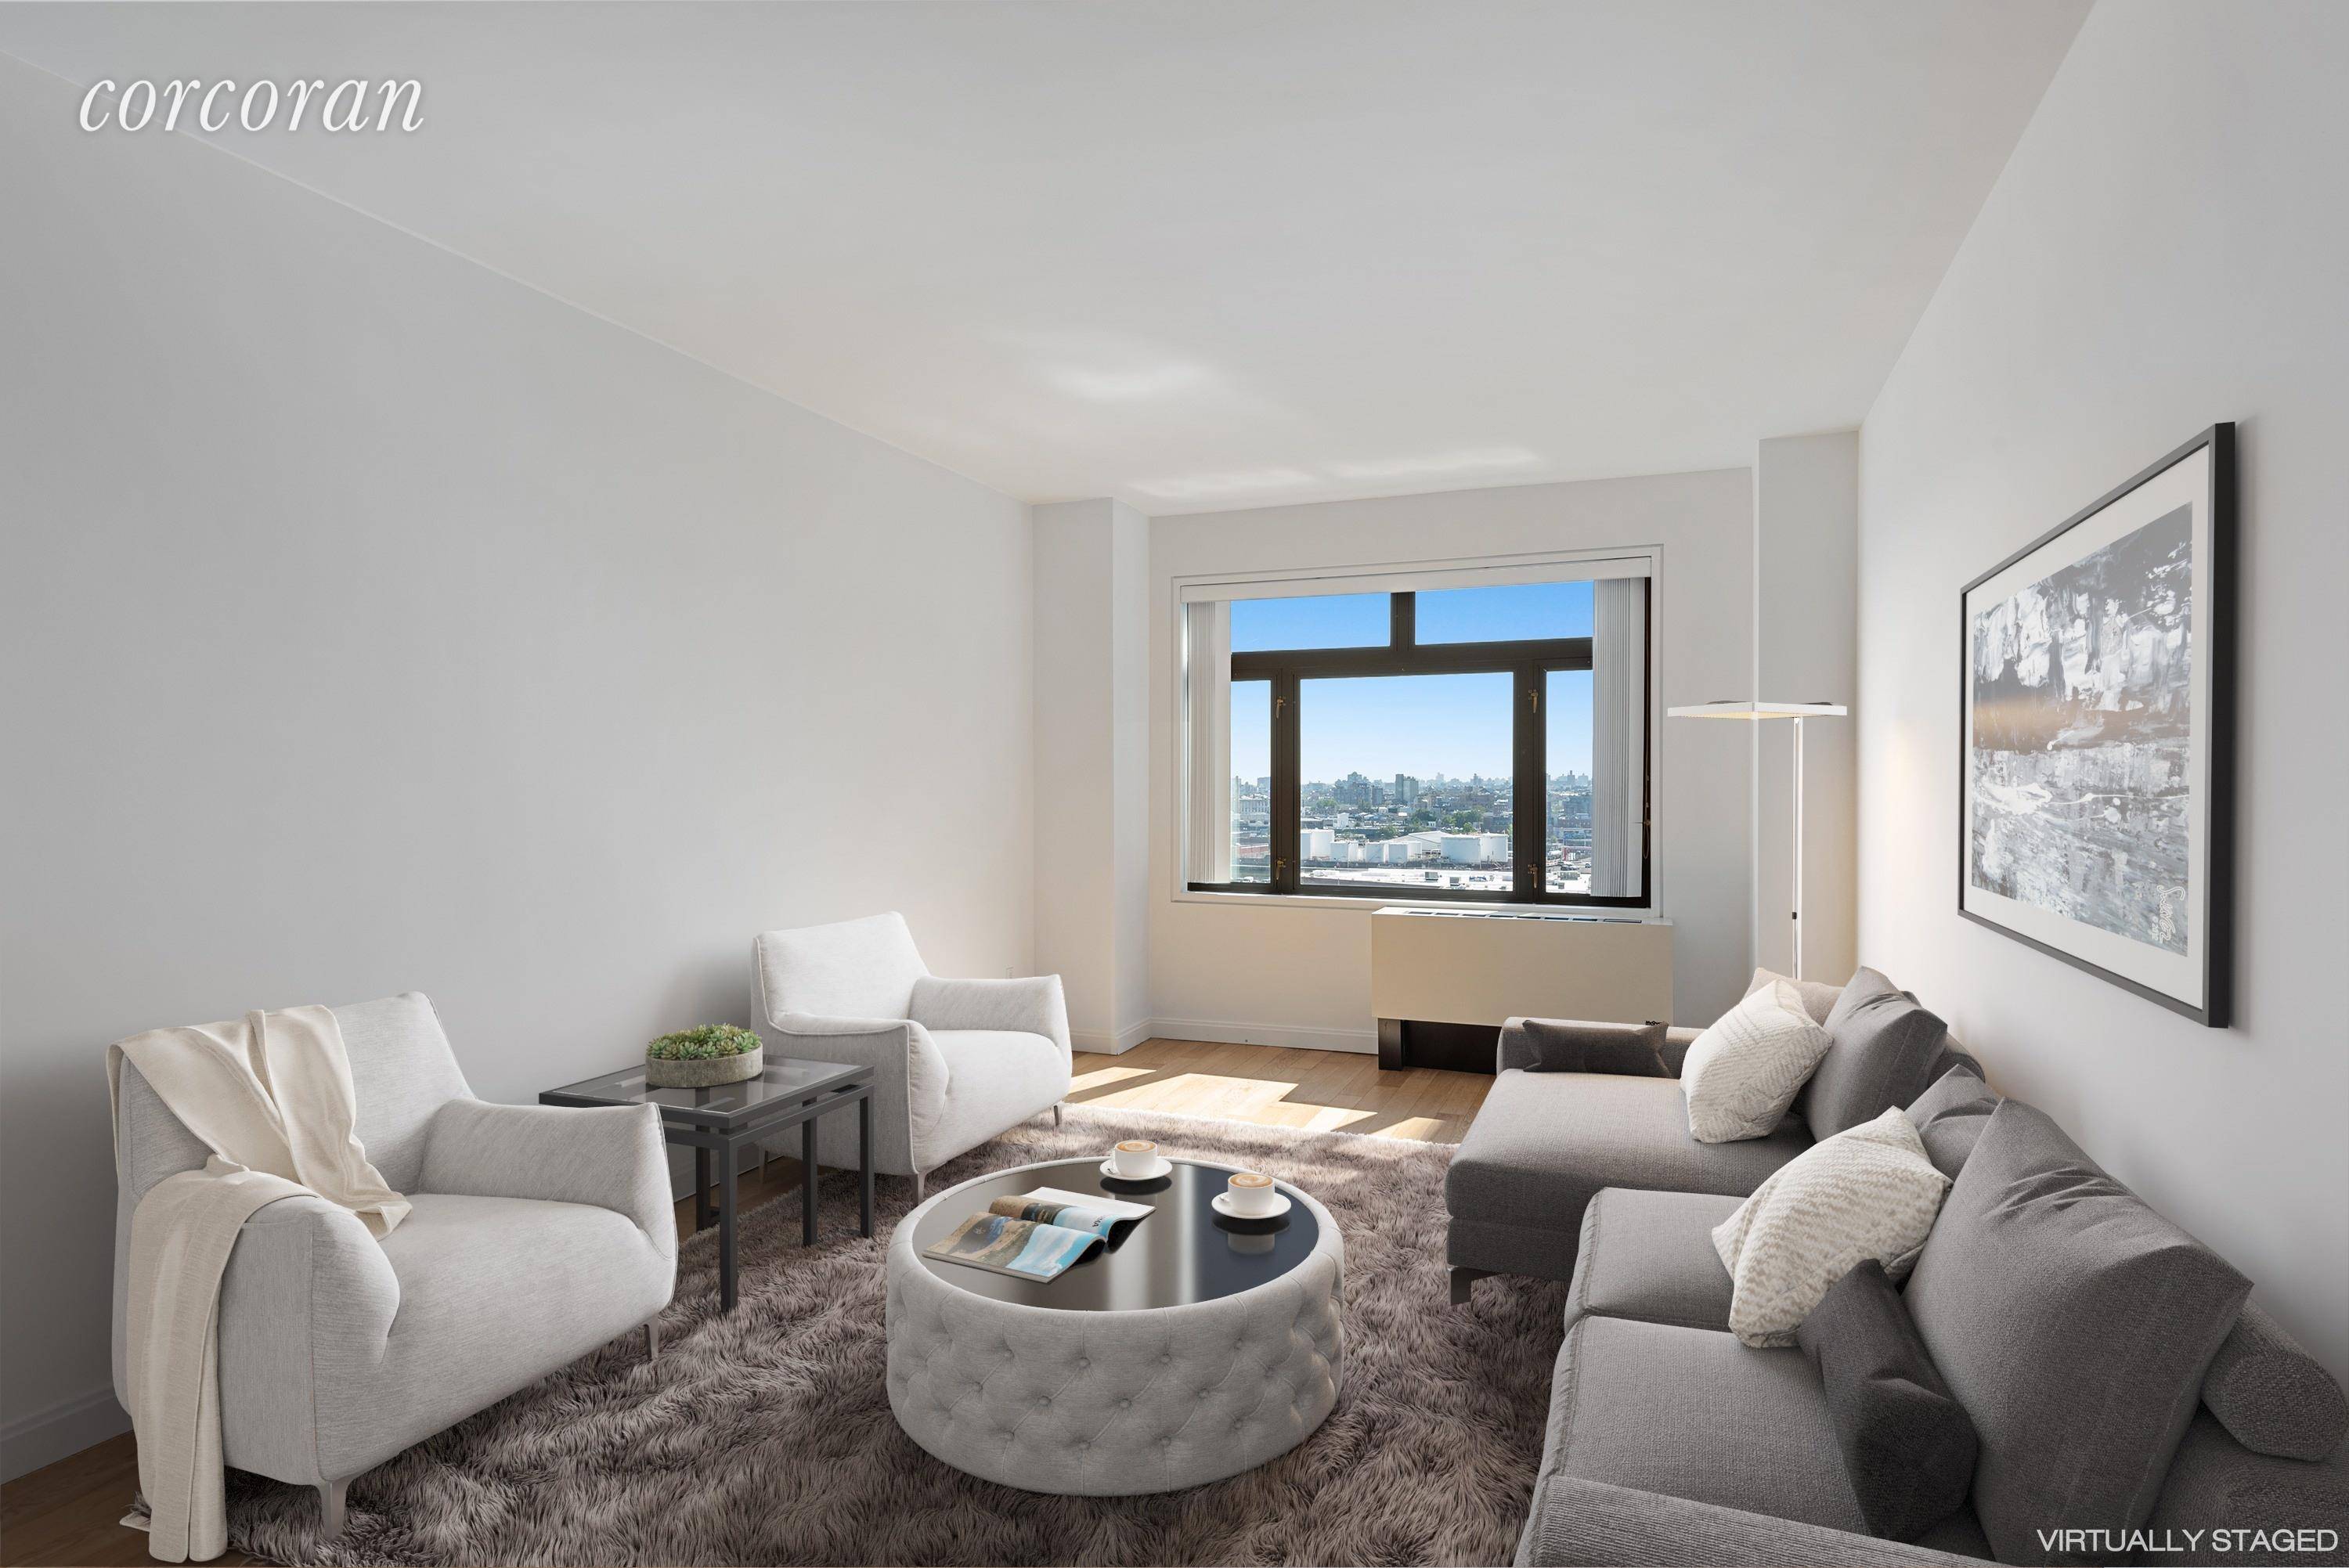 Apartment 8M is a large, south facing one bedroom condominium residence.